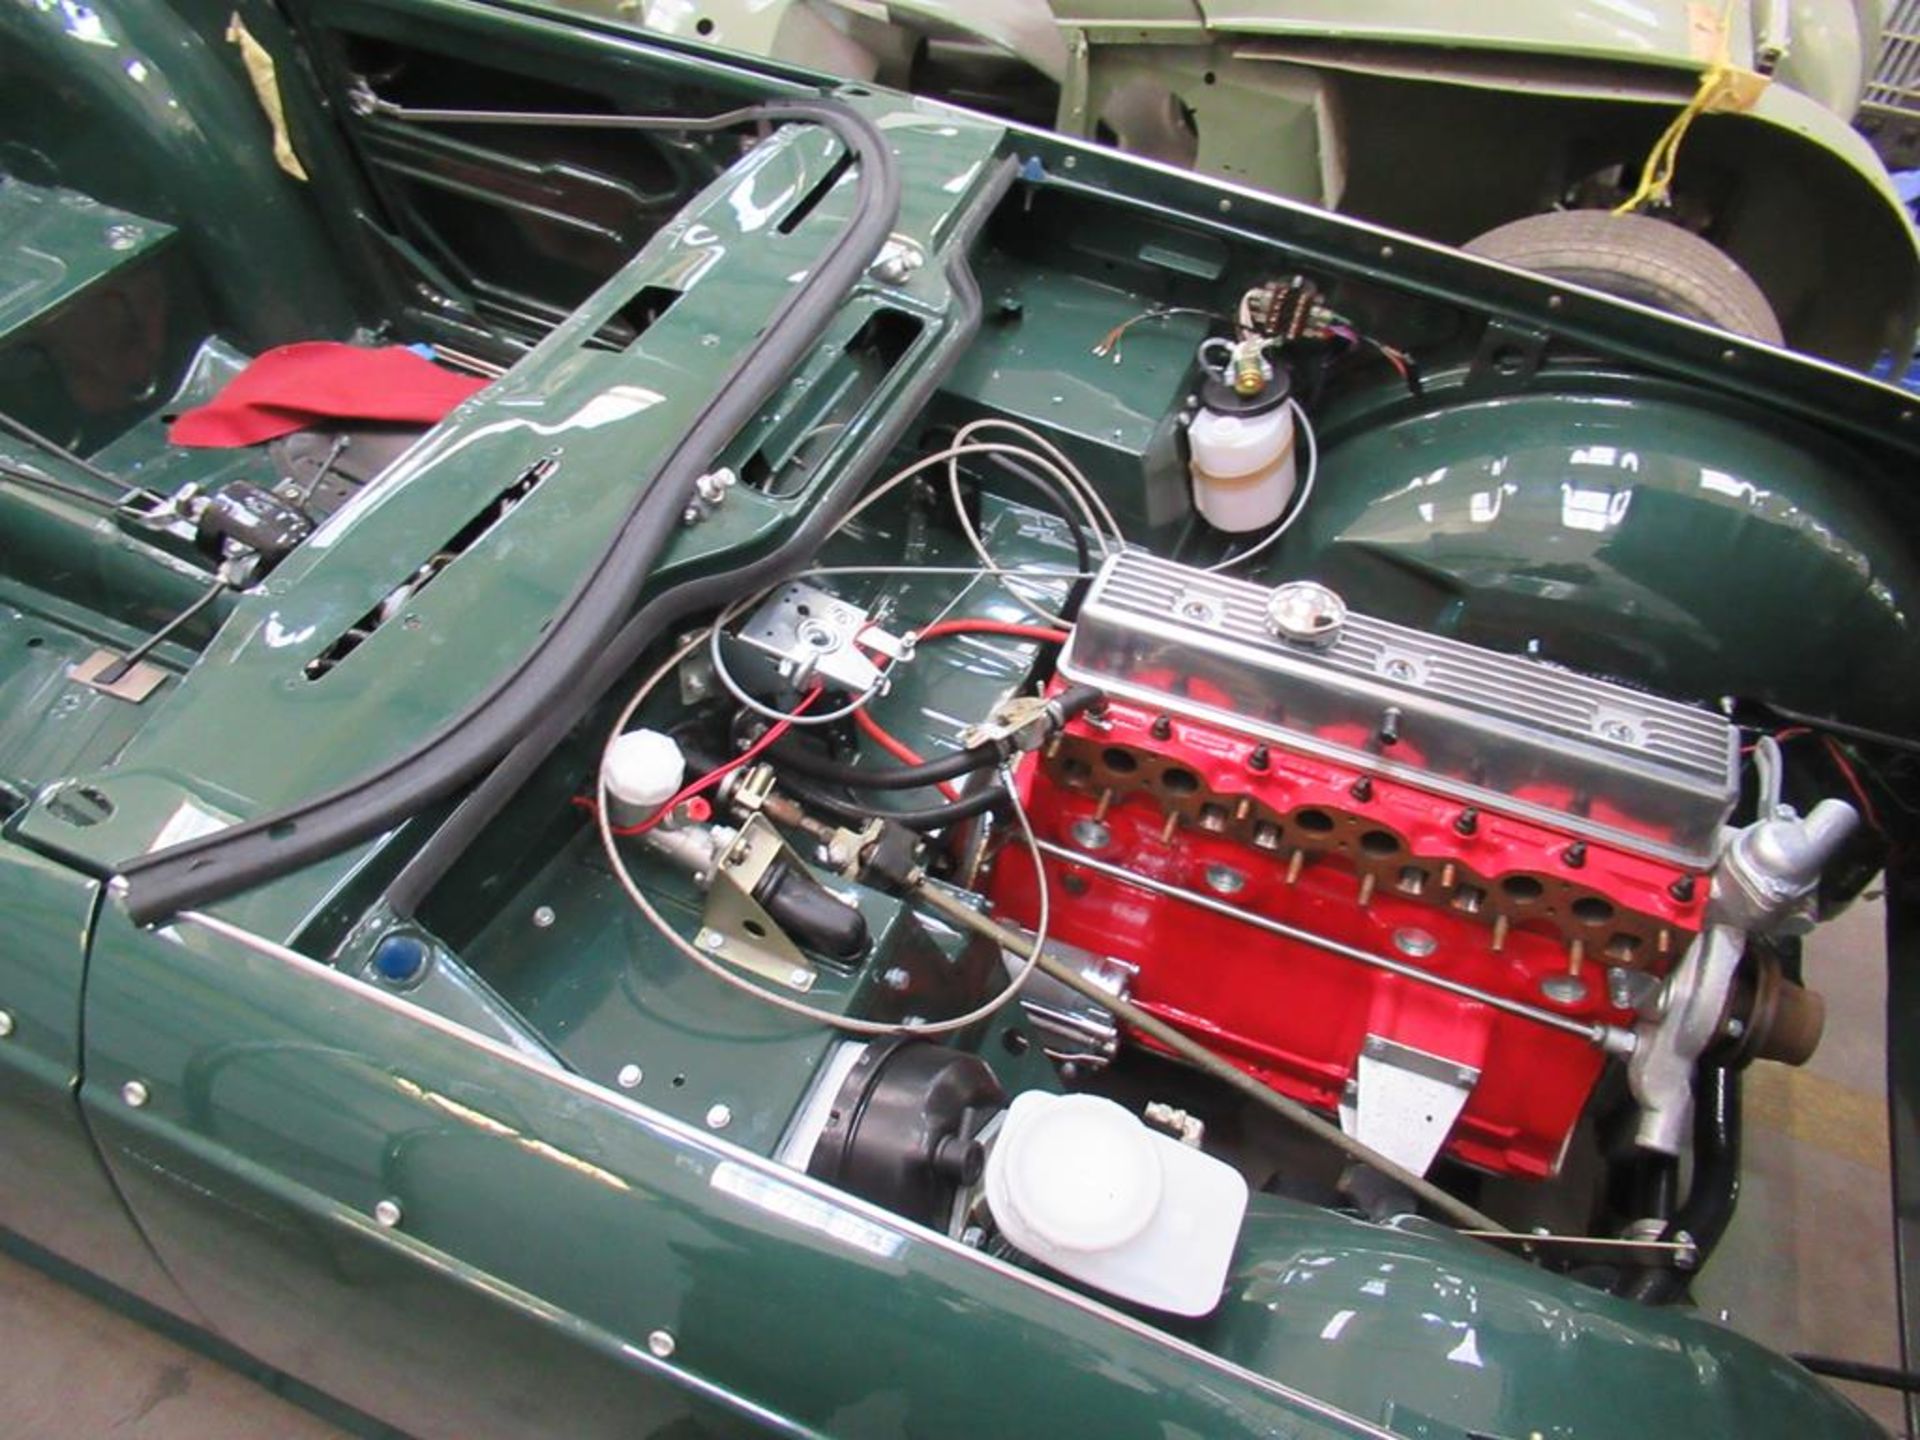 Partly restored 1968 Triumph TR5 PI fitted with Steel Engine - Image 10 of 44